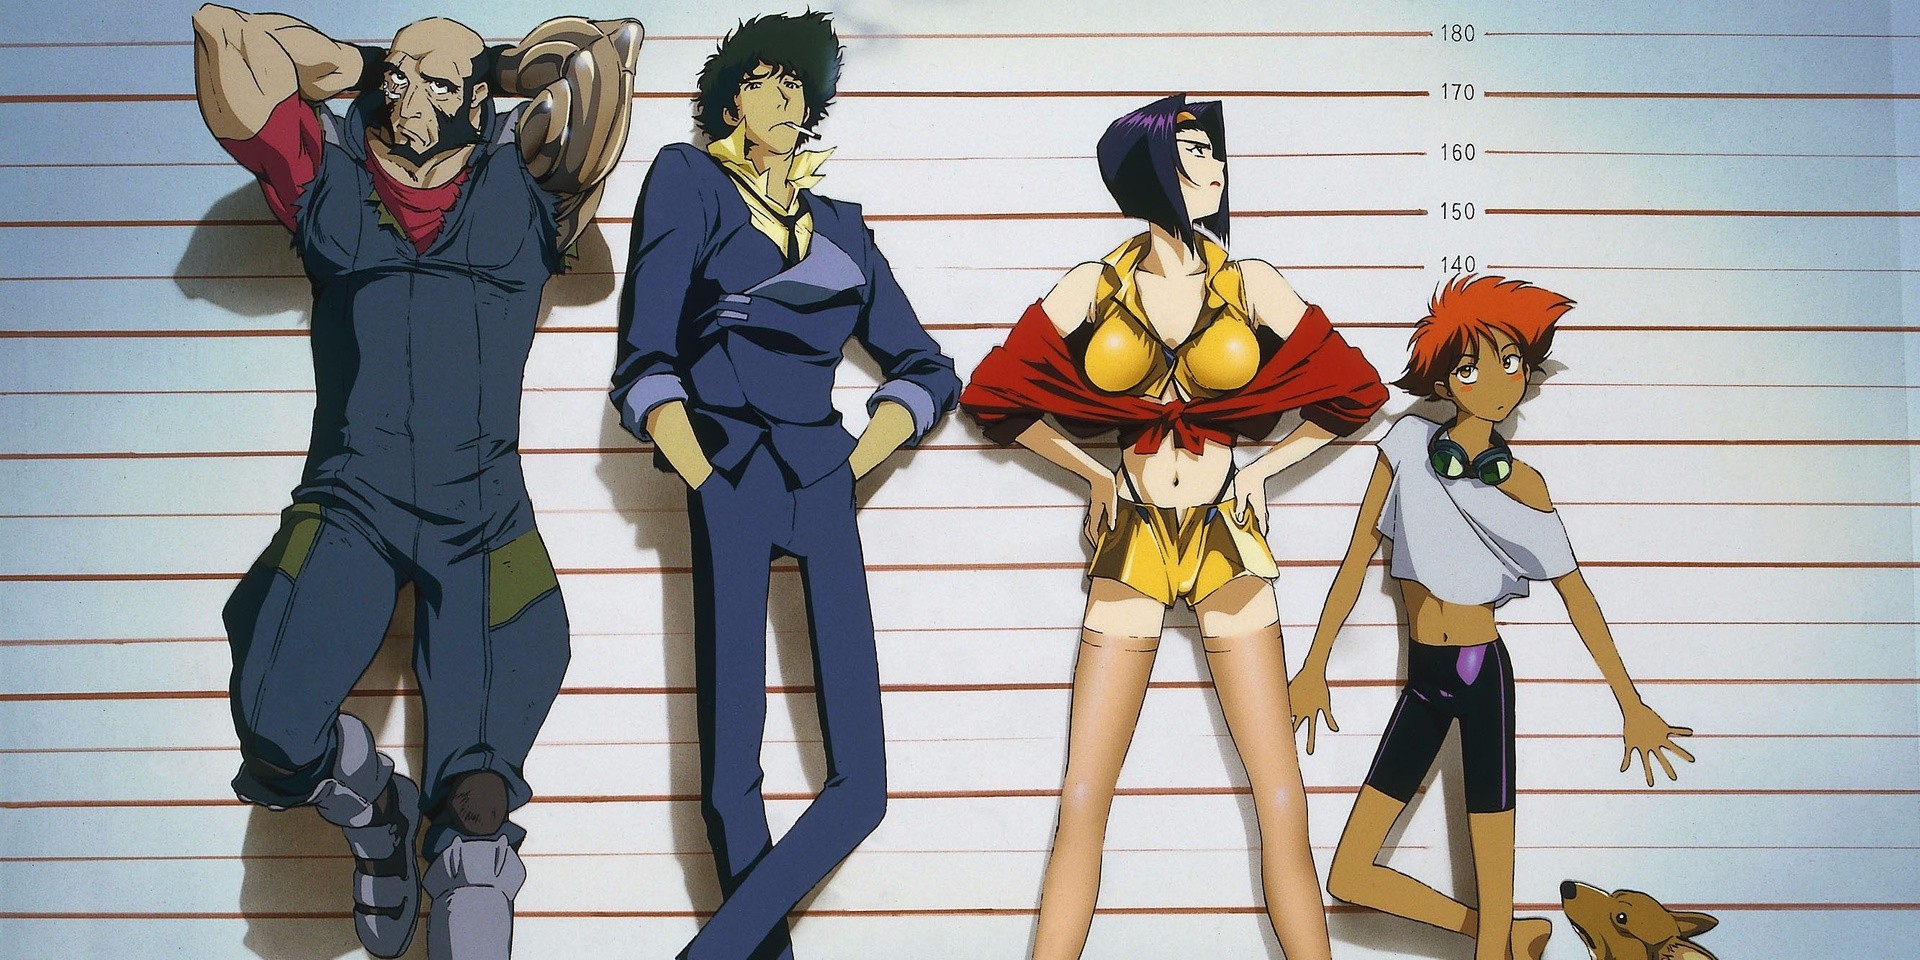 15 great anime theme songs, from Samurai Champloo to Sailor Moon